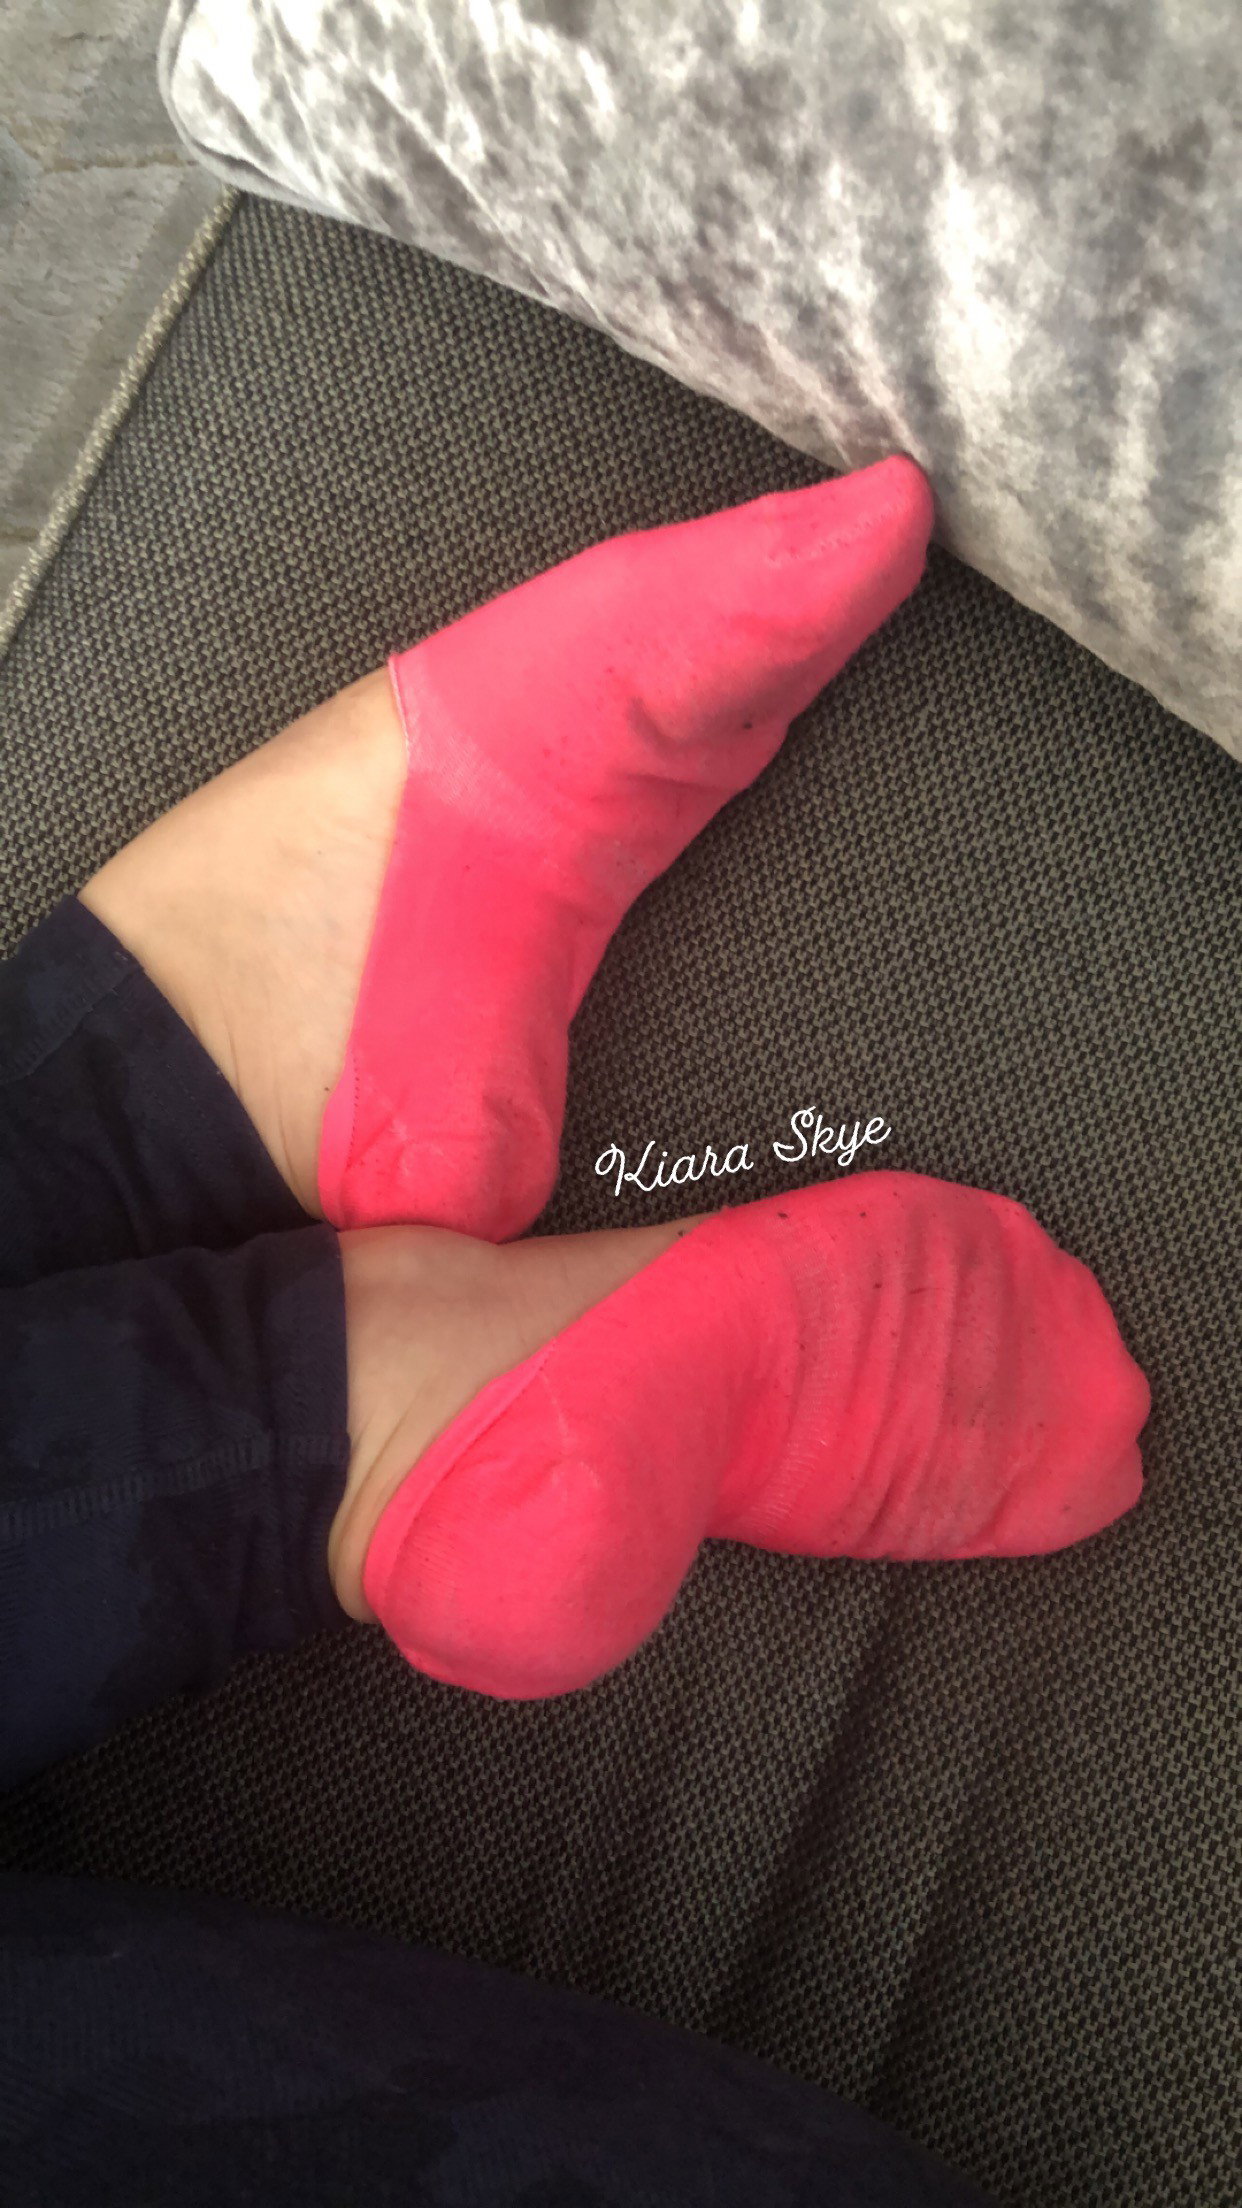 Photo by Kiara Skye with the username @KiaraSkye, who is a star user,  May 3, 2020 at 7:22 PM. The post is about the topic Hot Girls in Socks and the text says '🧦These sweaty, smelly #socks could be yours! 

Get them here- http://www.ebanned.net/cgi-bin/auction/auction.cgi?category=wclothing23&item=1588890311


#smellysocks #sweatyfeet #stinkyfeet #smellyfeet #wornitems #forsale #wornsocks #footfetish..'